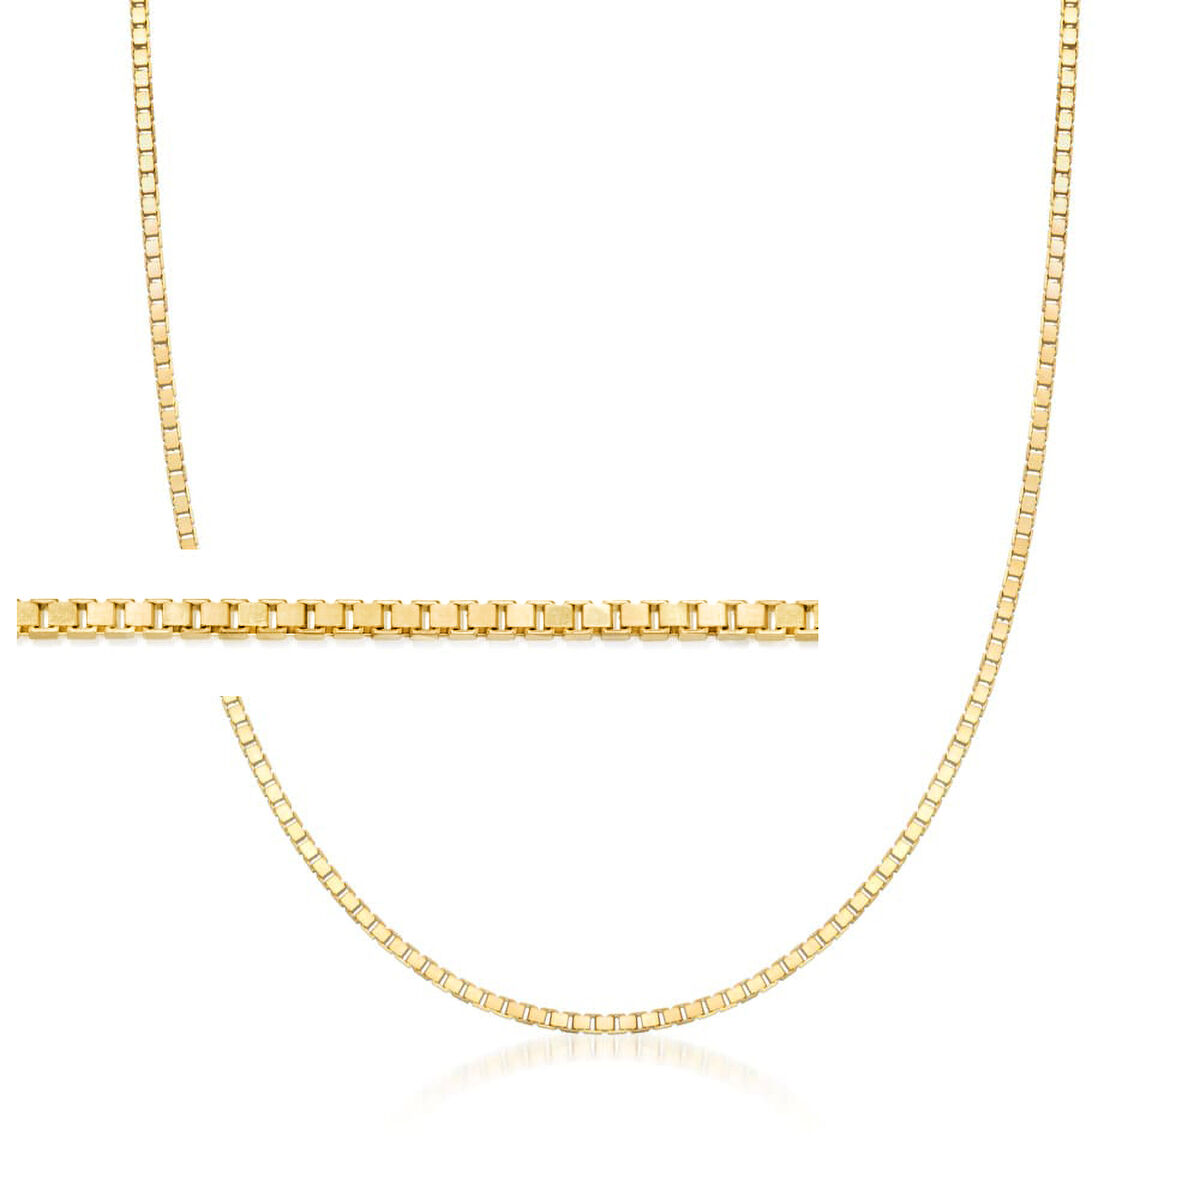 Details about  / 14K Yellow Gold Over Sterling Silver Shiny Polished Box Chain boxy cubed string